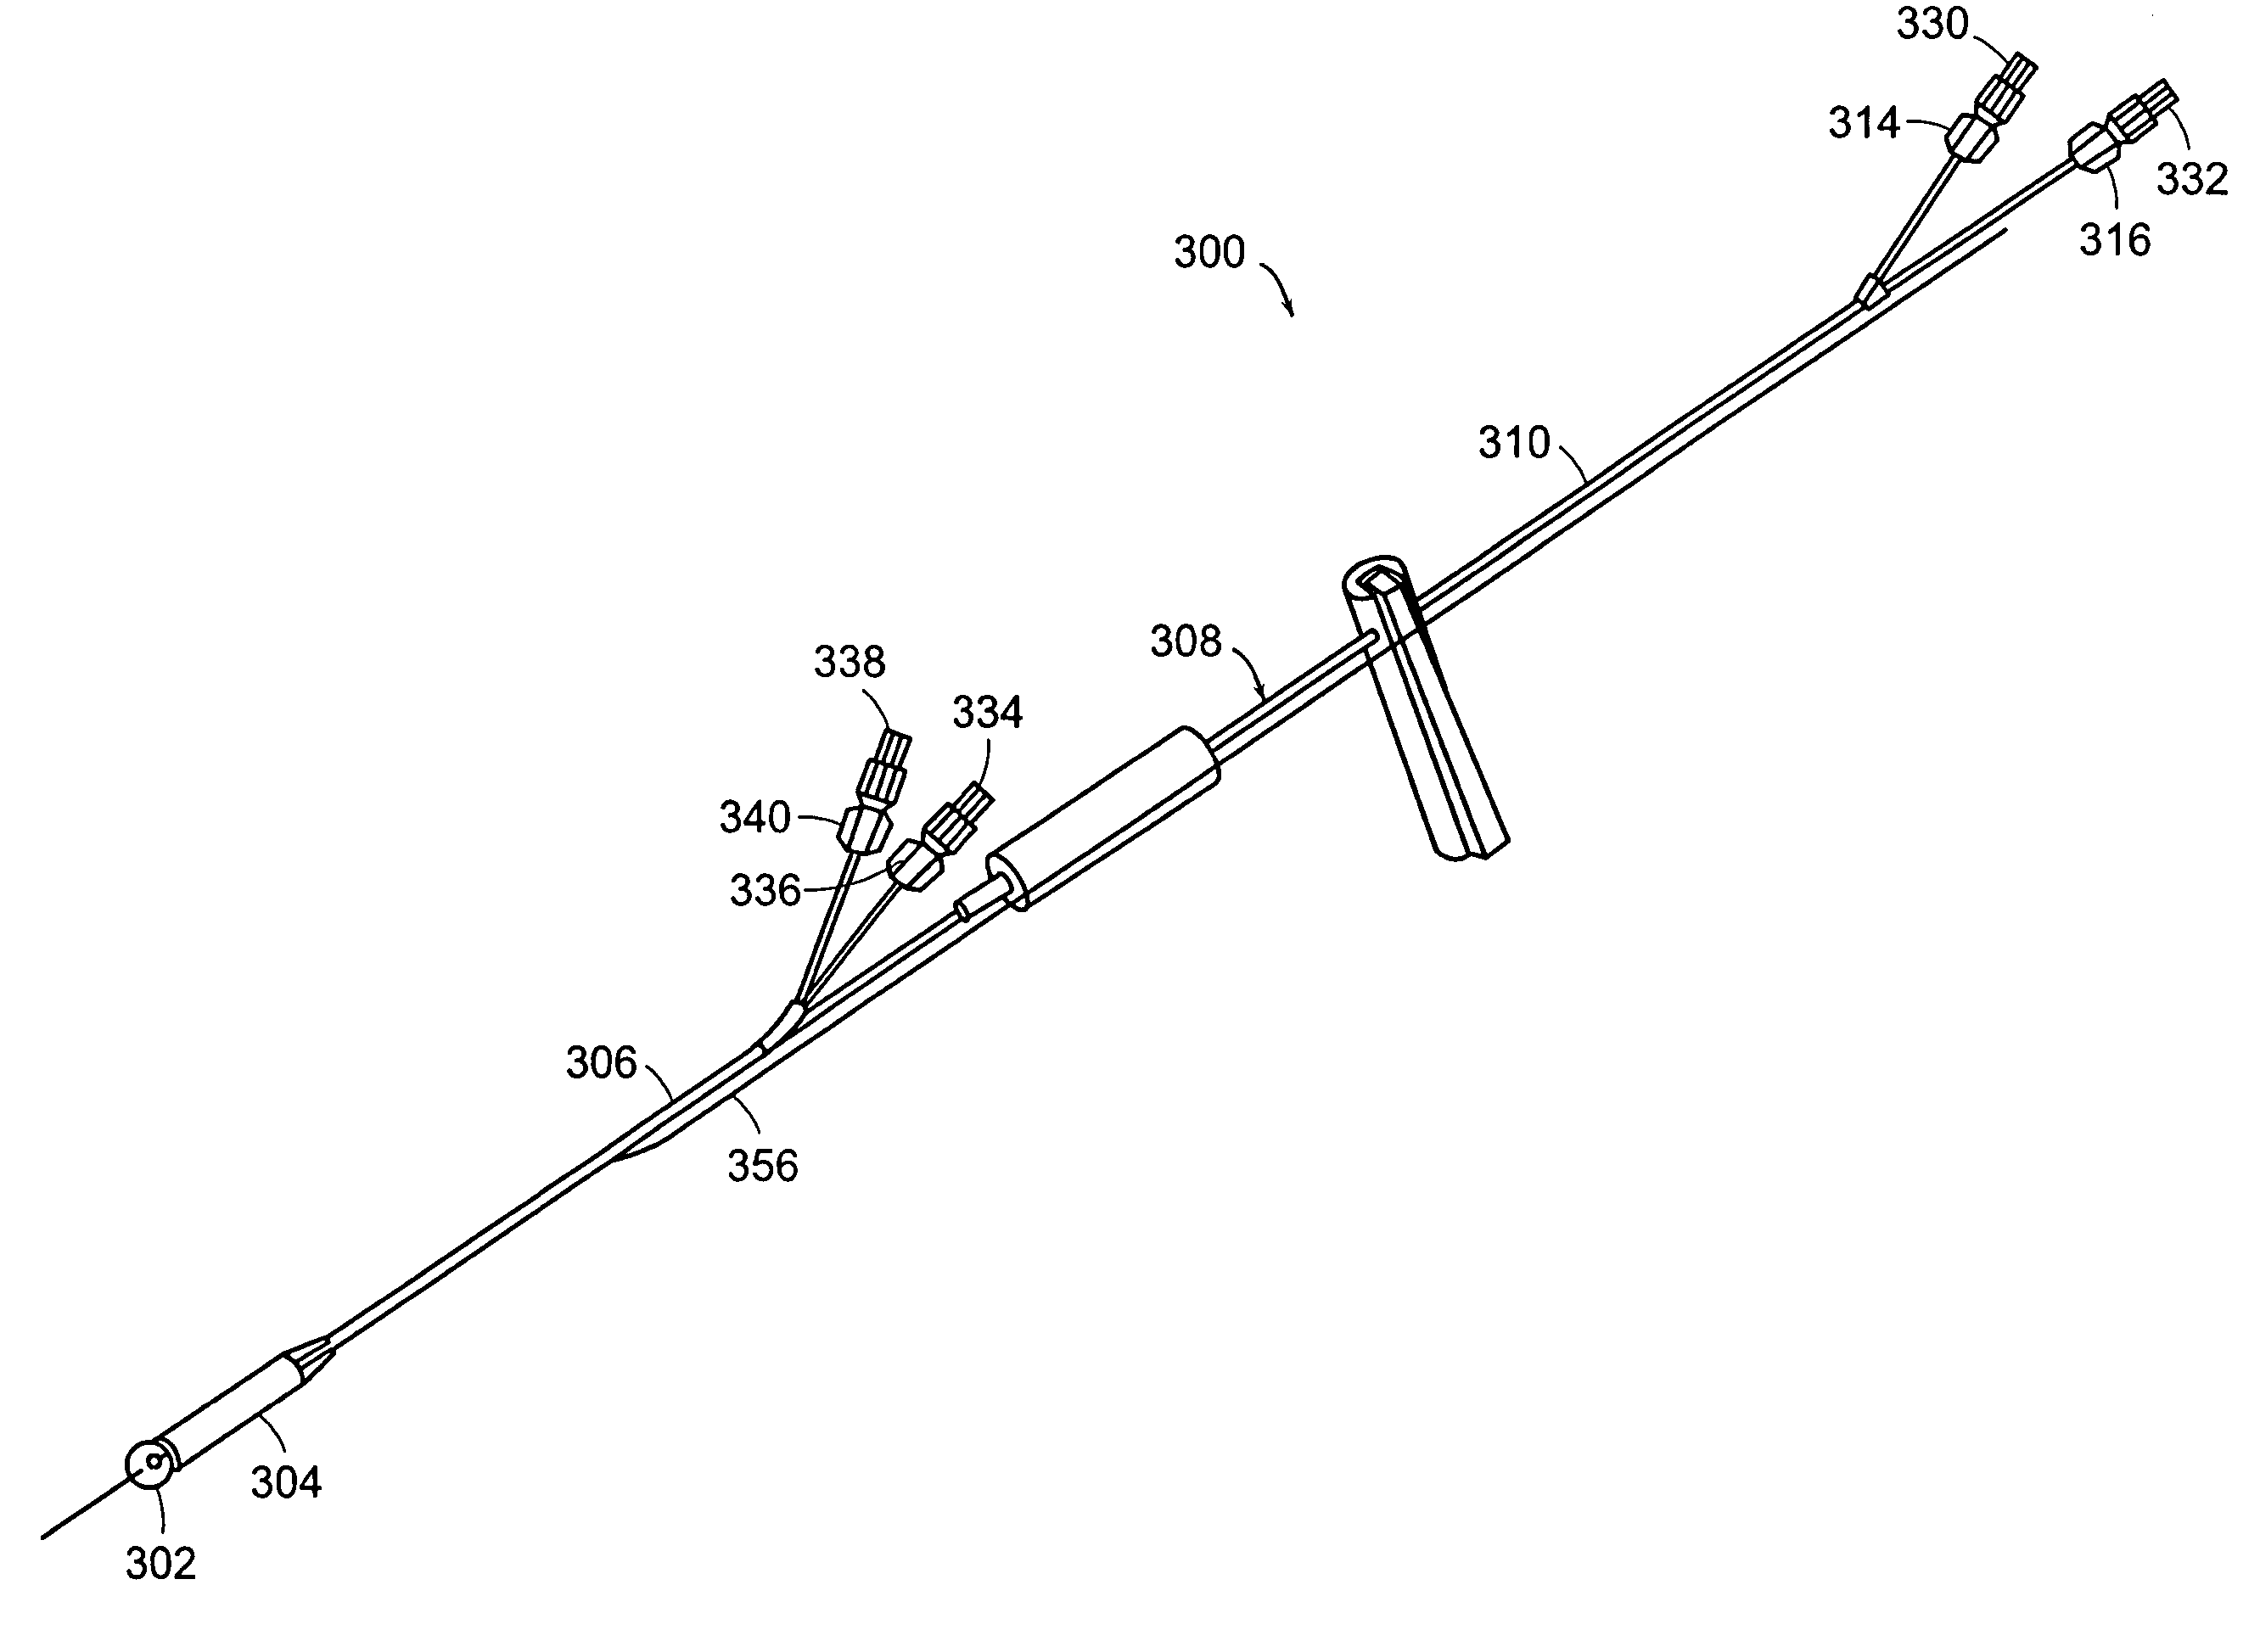 Methods and devices for placing a gastrointestinal sleeve